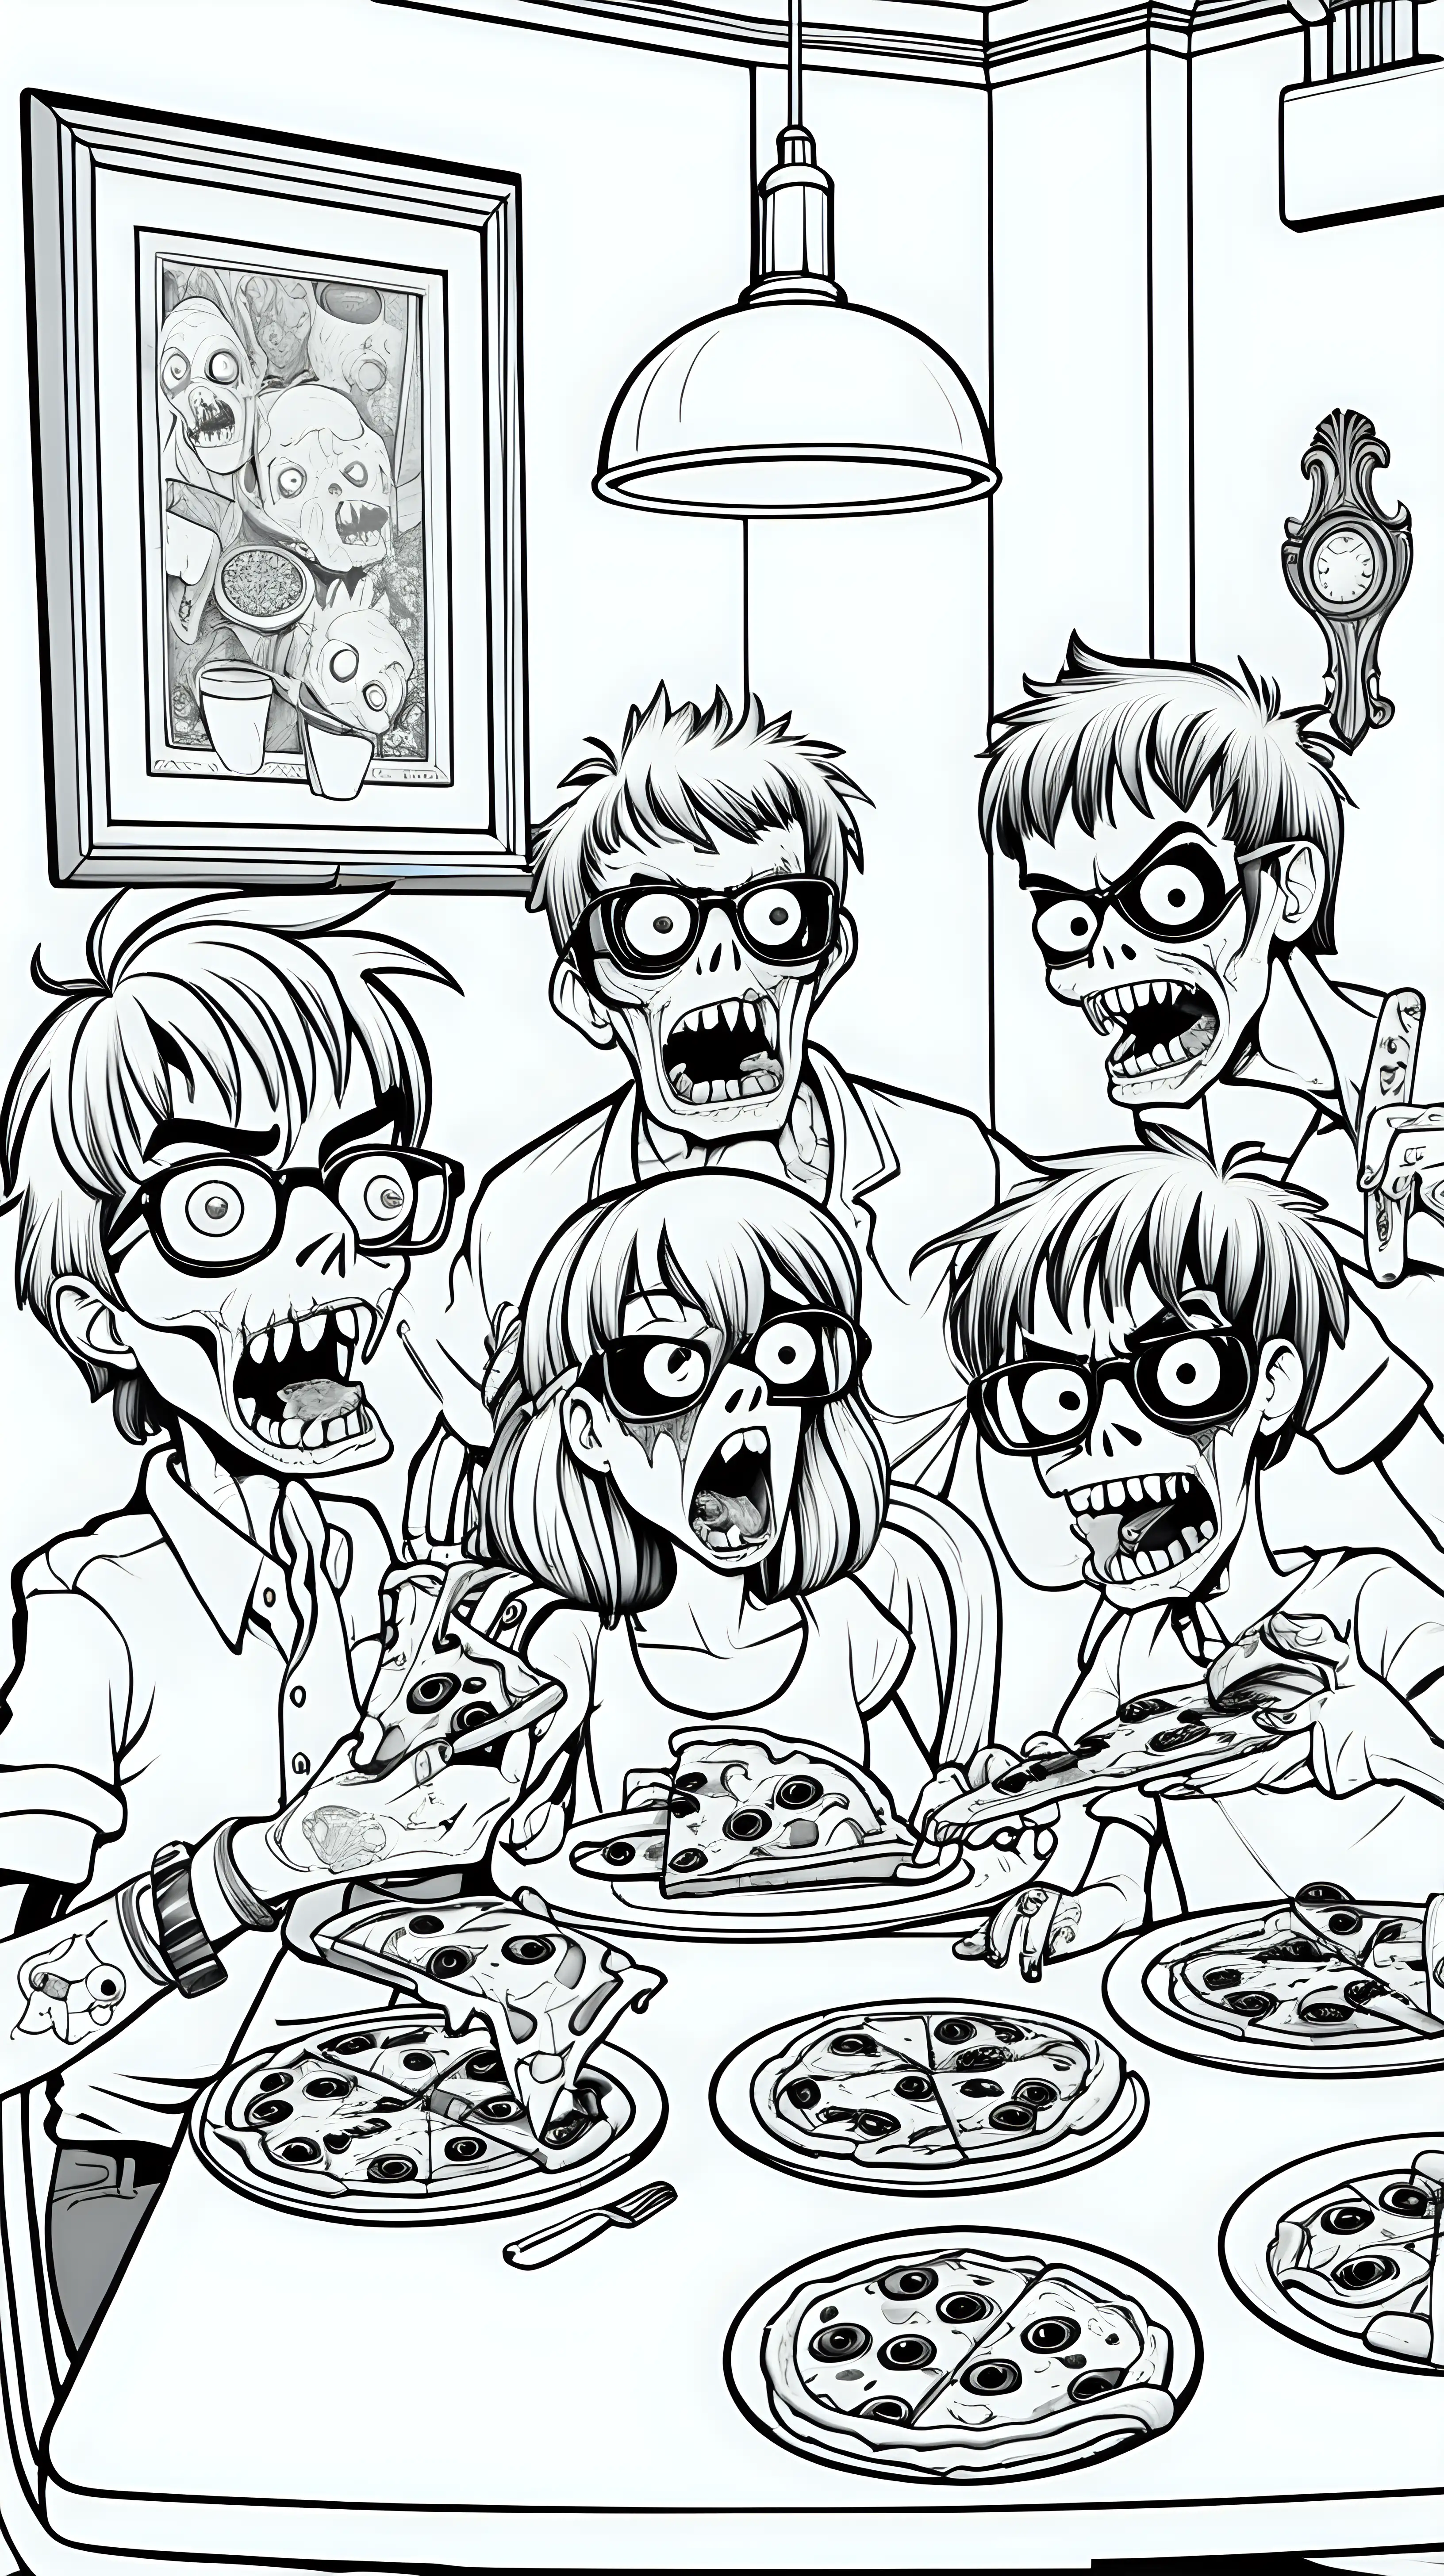 Whimsical Zombie Family Feast Hilarious Pizza Night in Monochrome